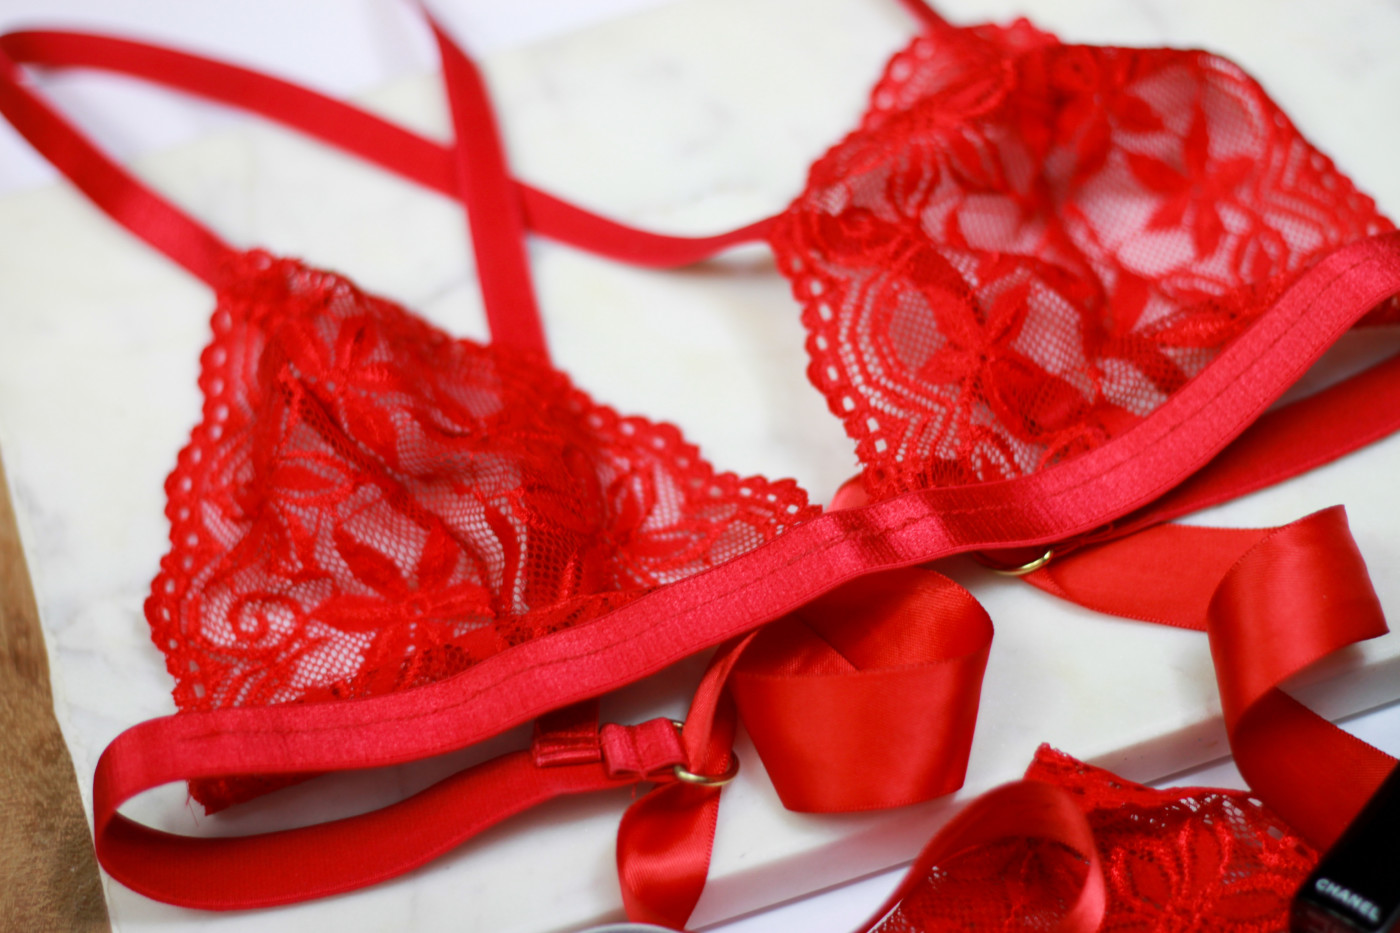 valentine's day, valentine's day tips, how to get ready for valentine's day, dark side of the loom, custom lingerie, custom lingerie canada, sexy valentine's day look, where to get sexy lingerie, how to make valentine's day perfect, ideas for valentine's day